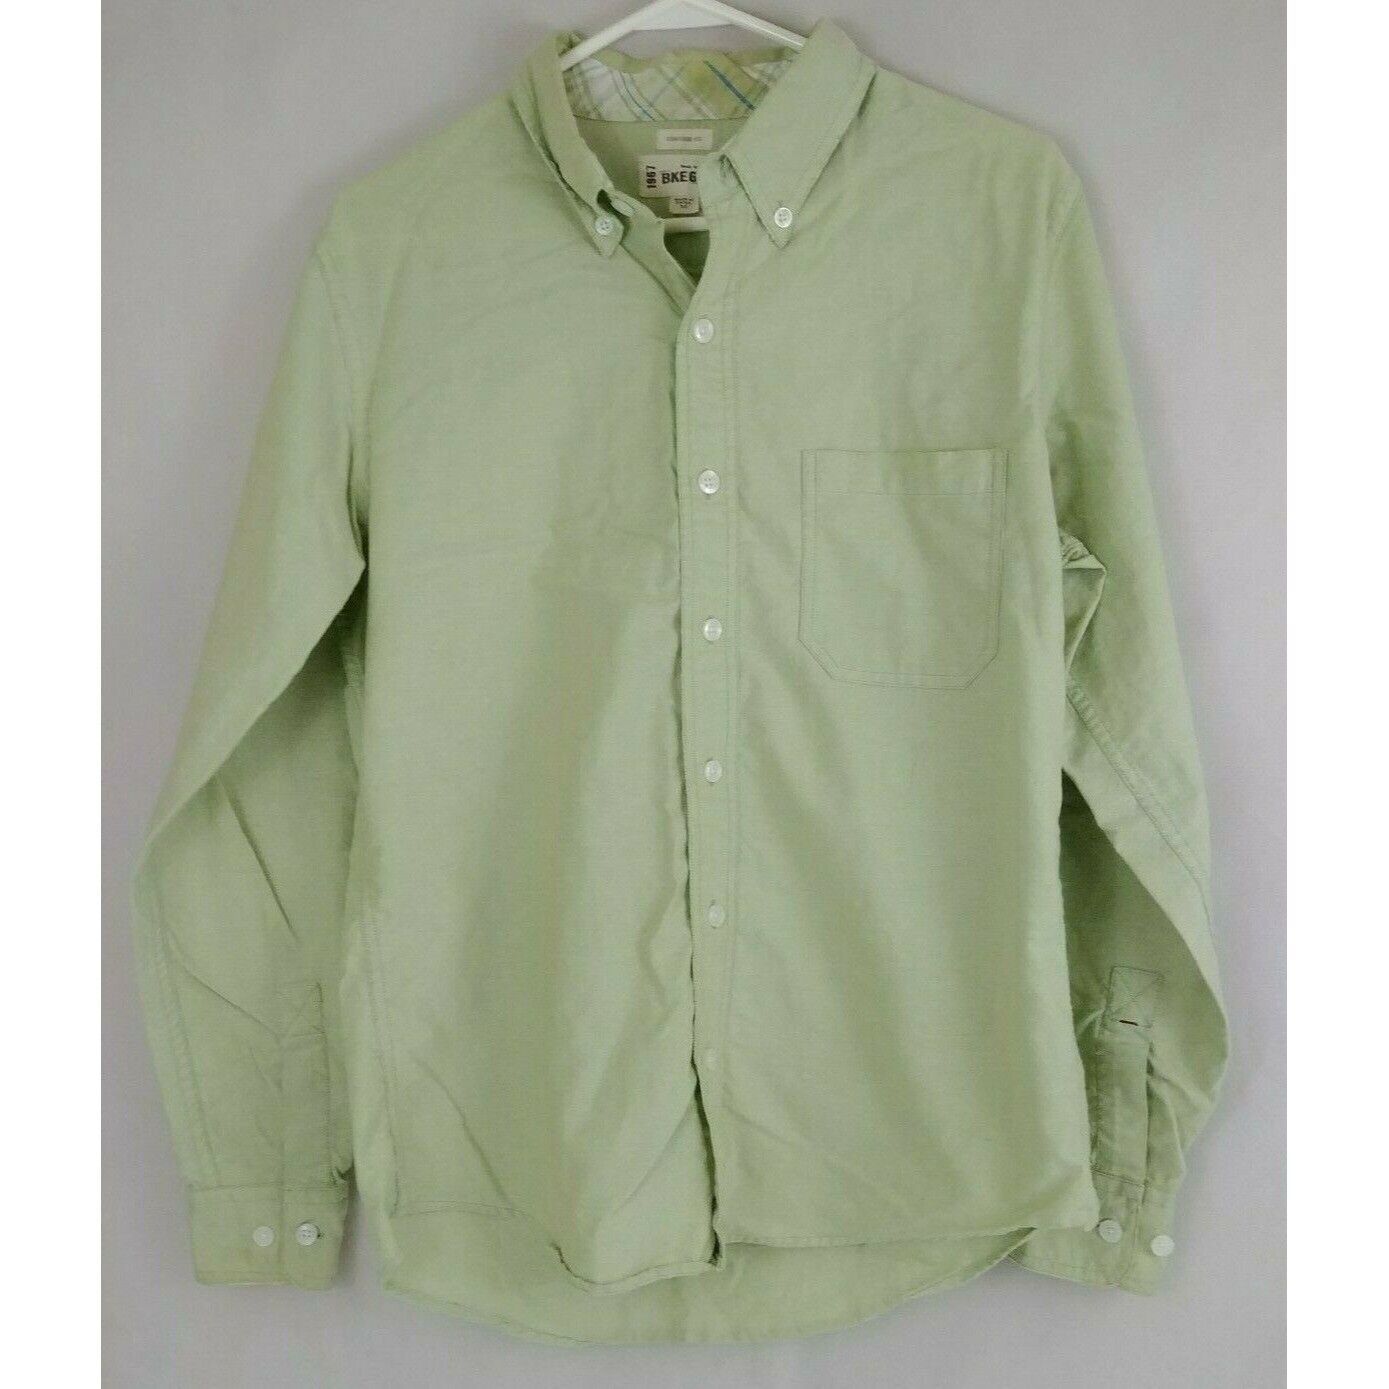 Primary image for BKE 67 Men's Button Up Long Sleeve Solid Light Green Dress Shirt Size Medium